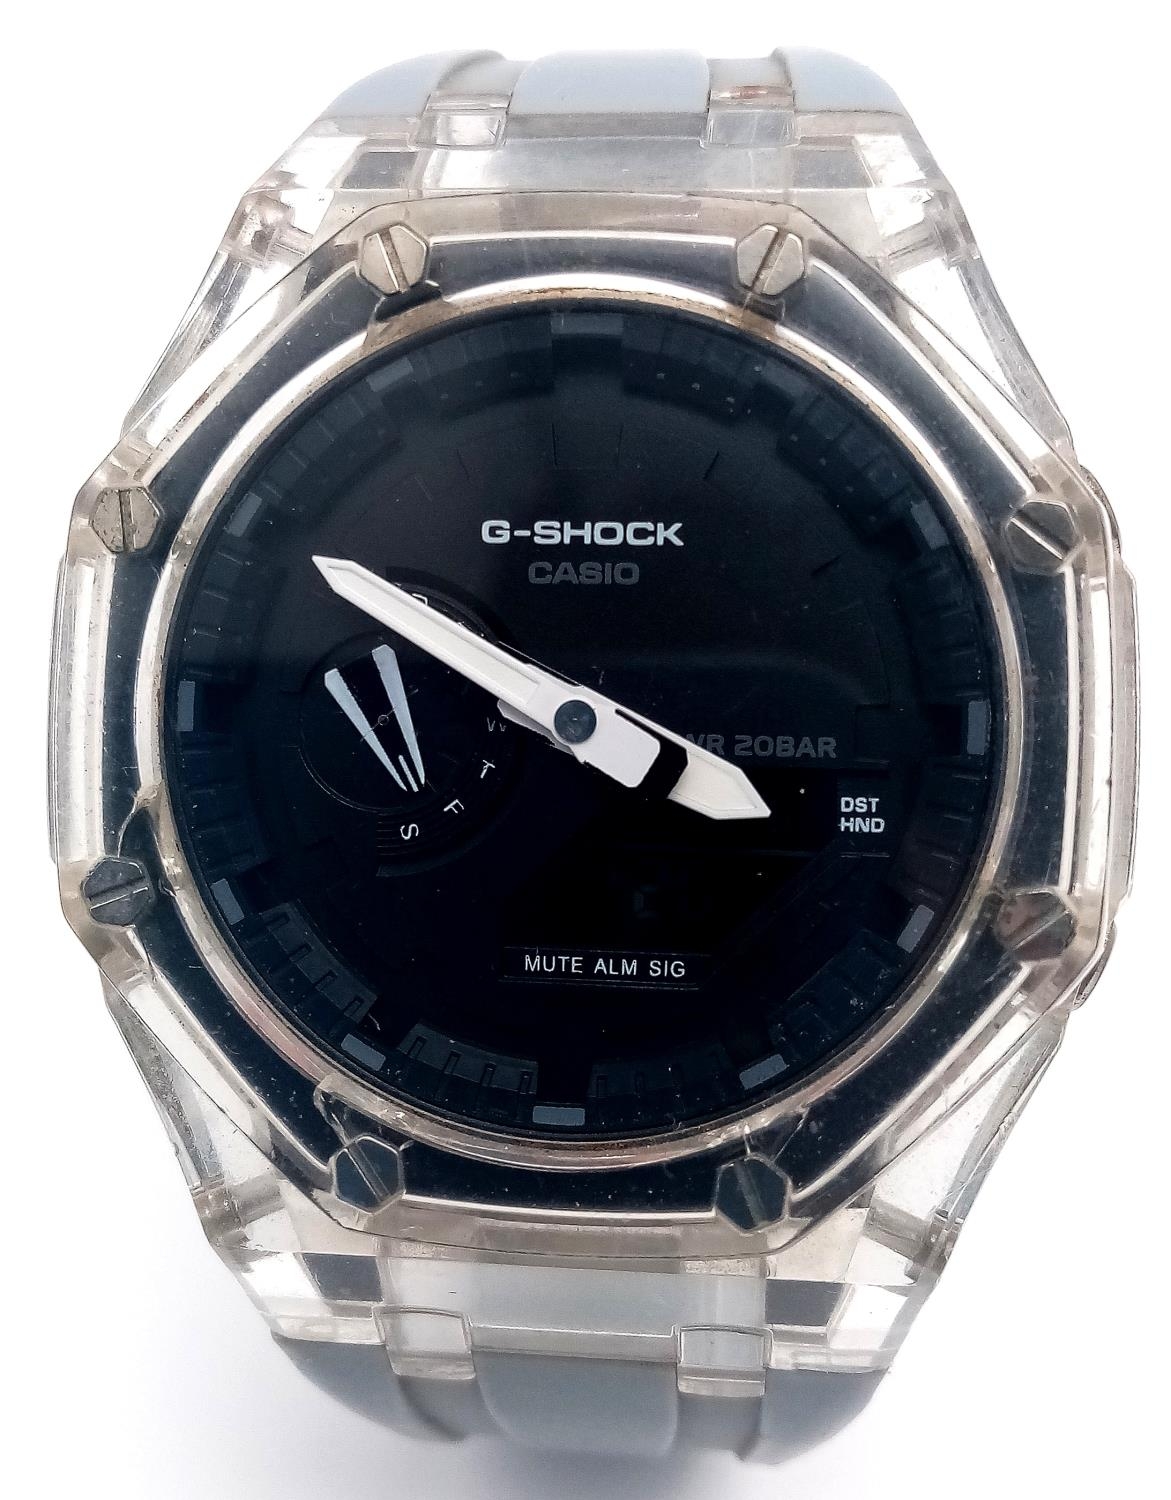 A Casio G Shock Quartz Gents Watch. Grey rubber strap. Case - 44mm. Black dial. In working order. - Image 2 of 5